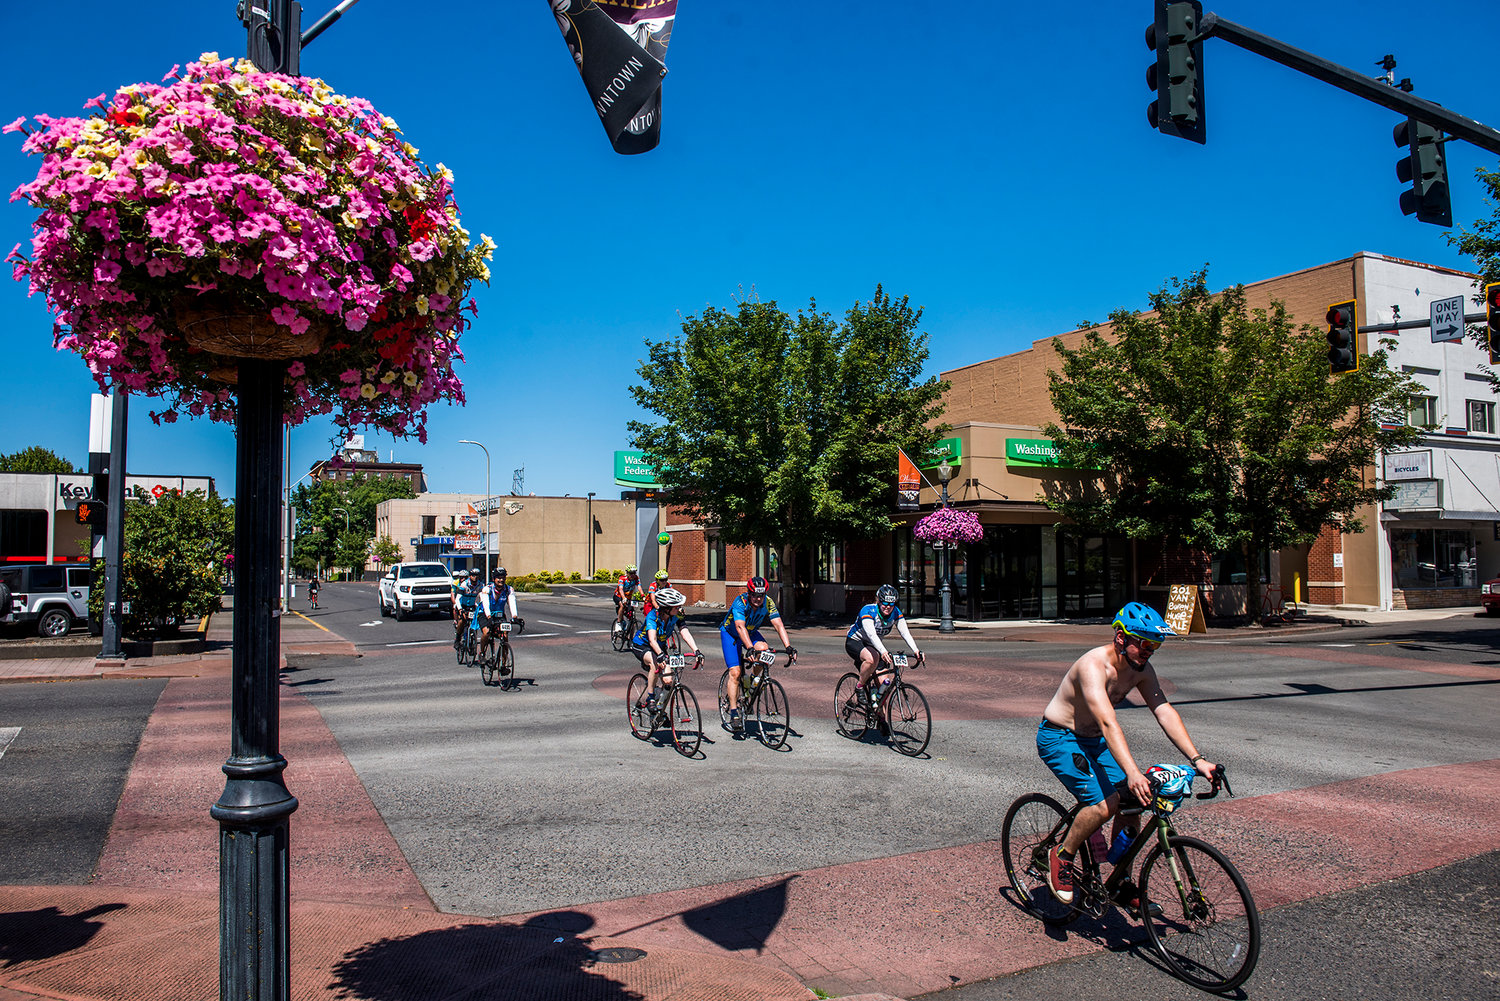 A shirtless man leads a pack of cyclists through downtown Centralia on Saturday afternoon during the annual Seattle to Portland bicycle event.